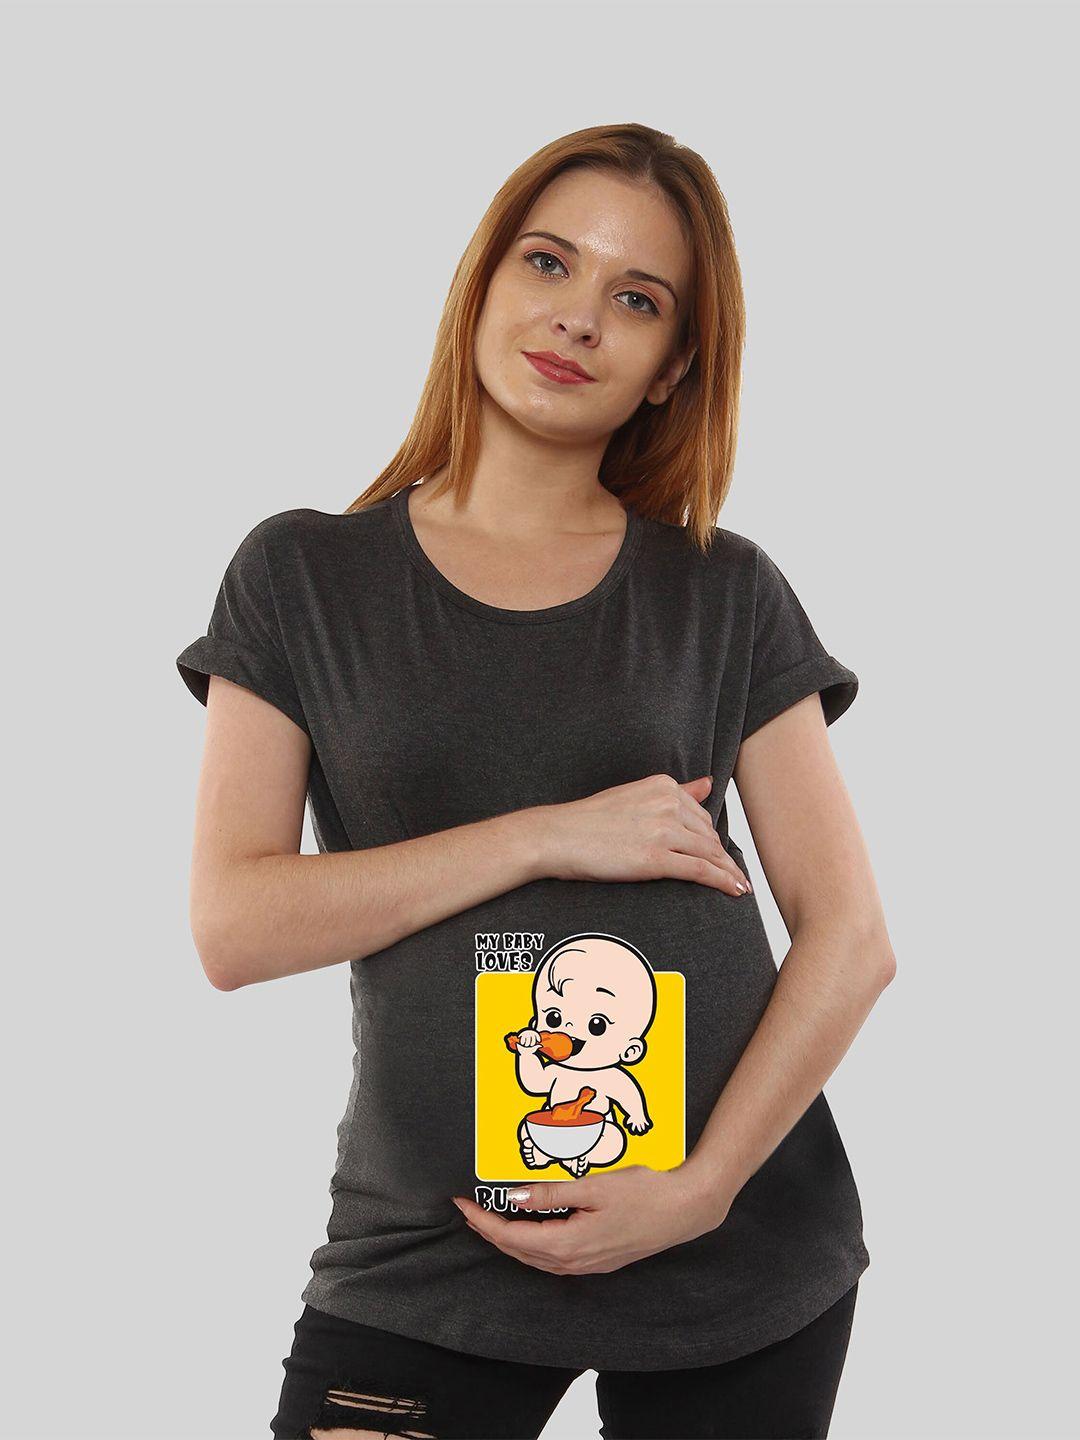 sillyboom printed maternity cotton t-shirt